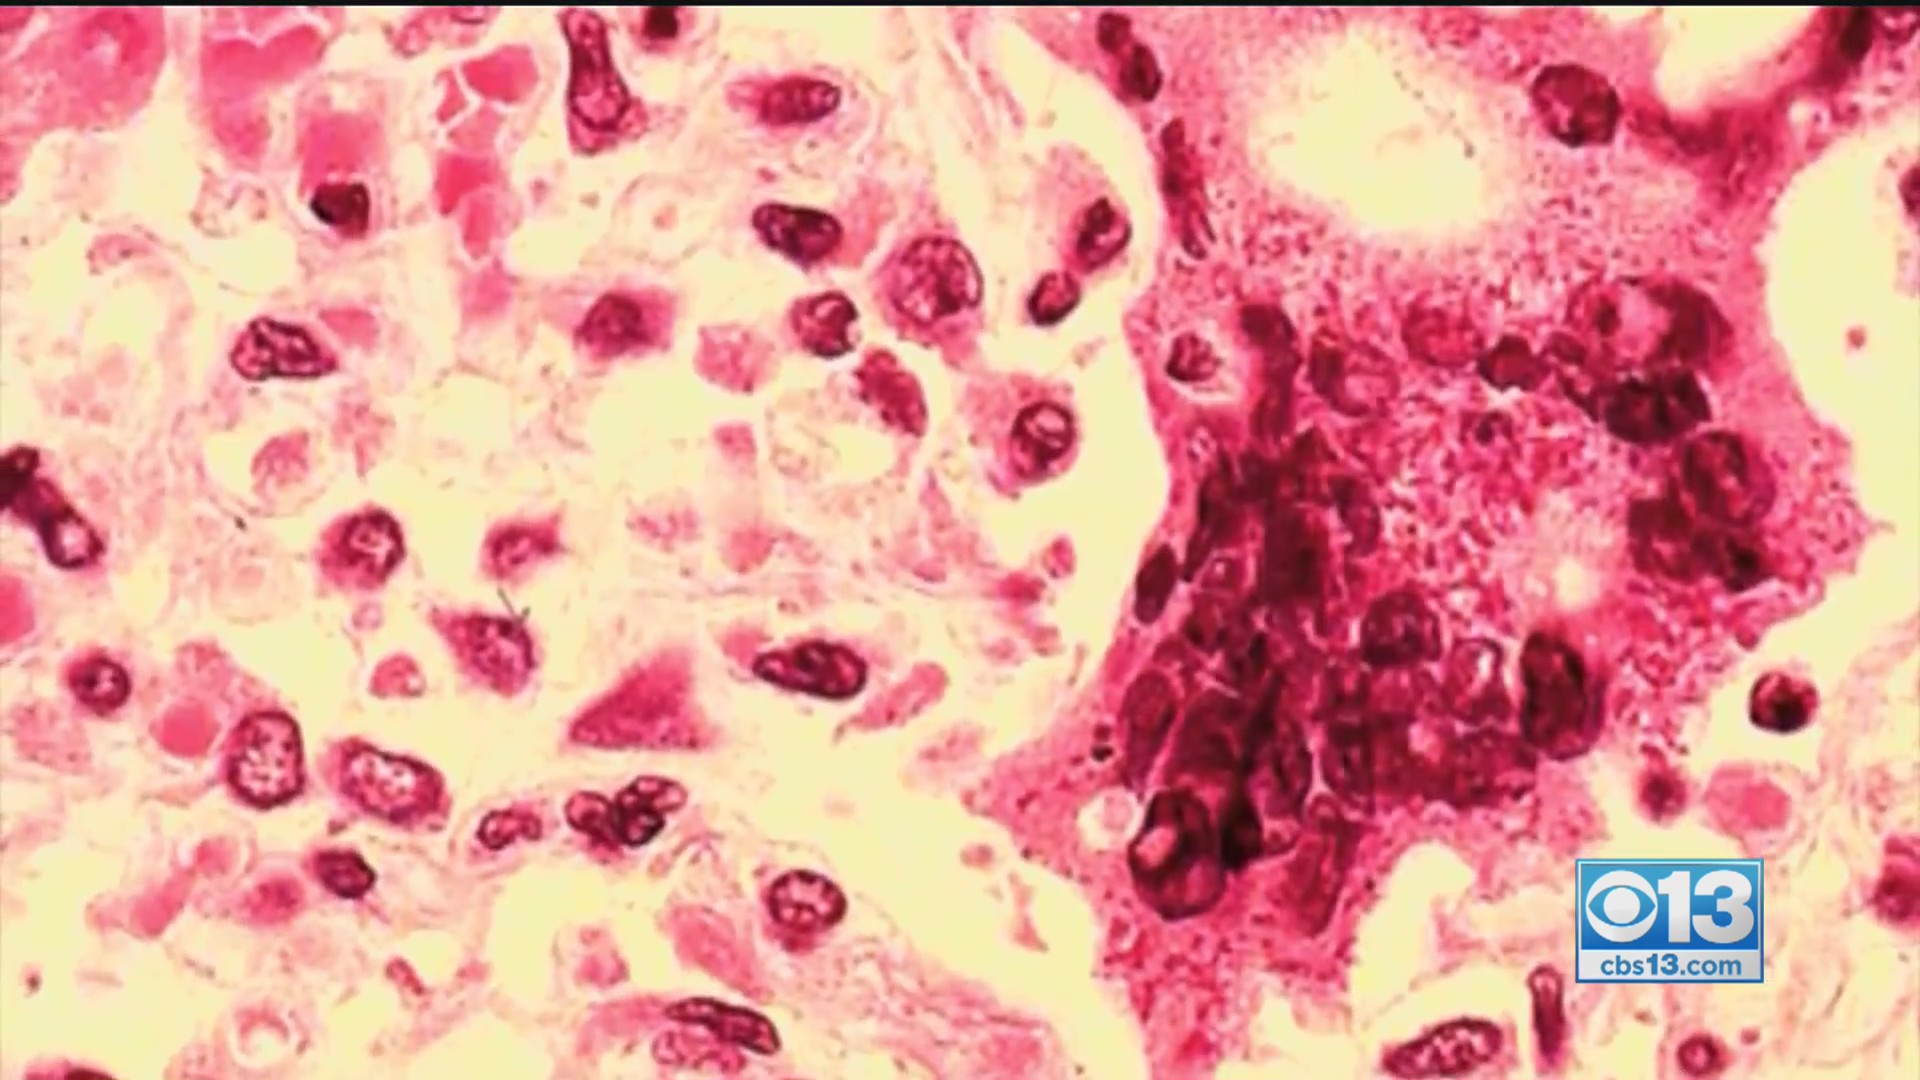 Old Virus Resurfaces In Calaveras County As Young Child Contracts Measles